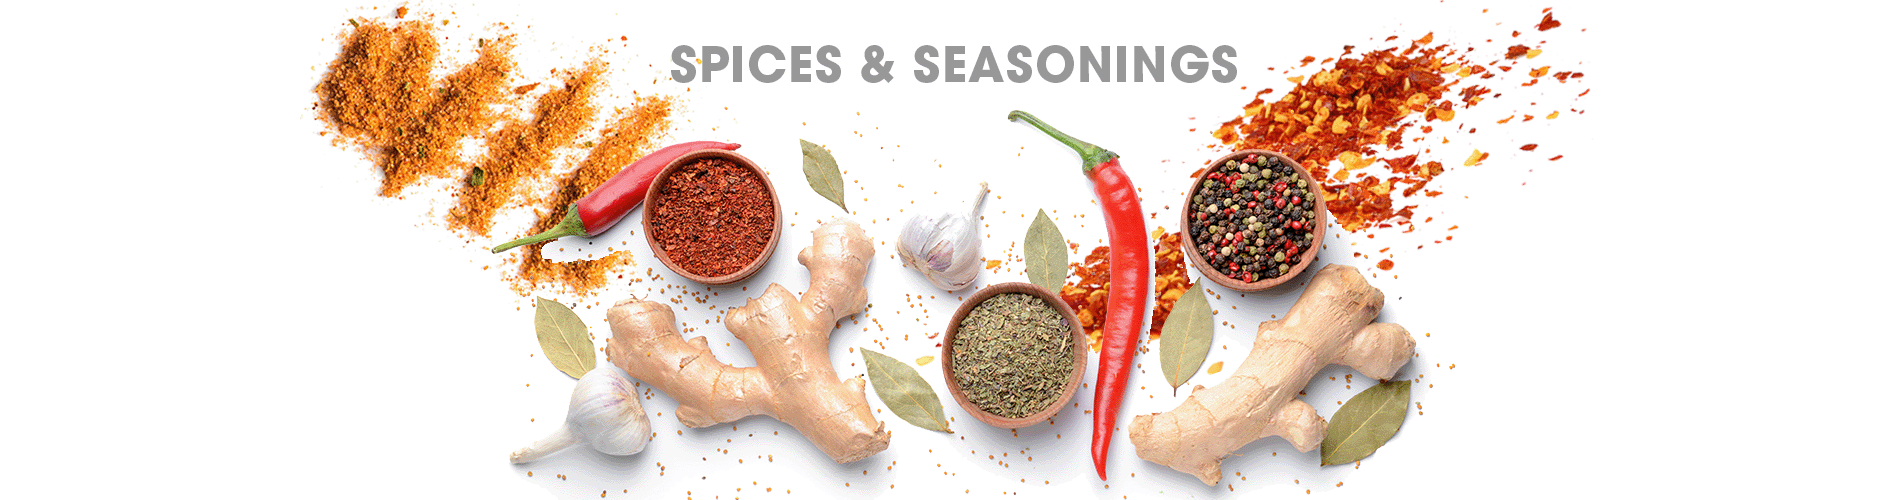 Category - Spices & Seasoning 1900x500